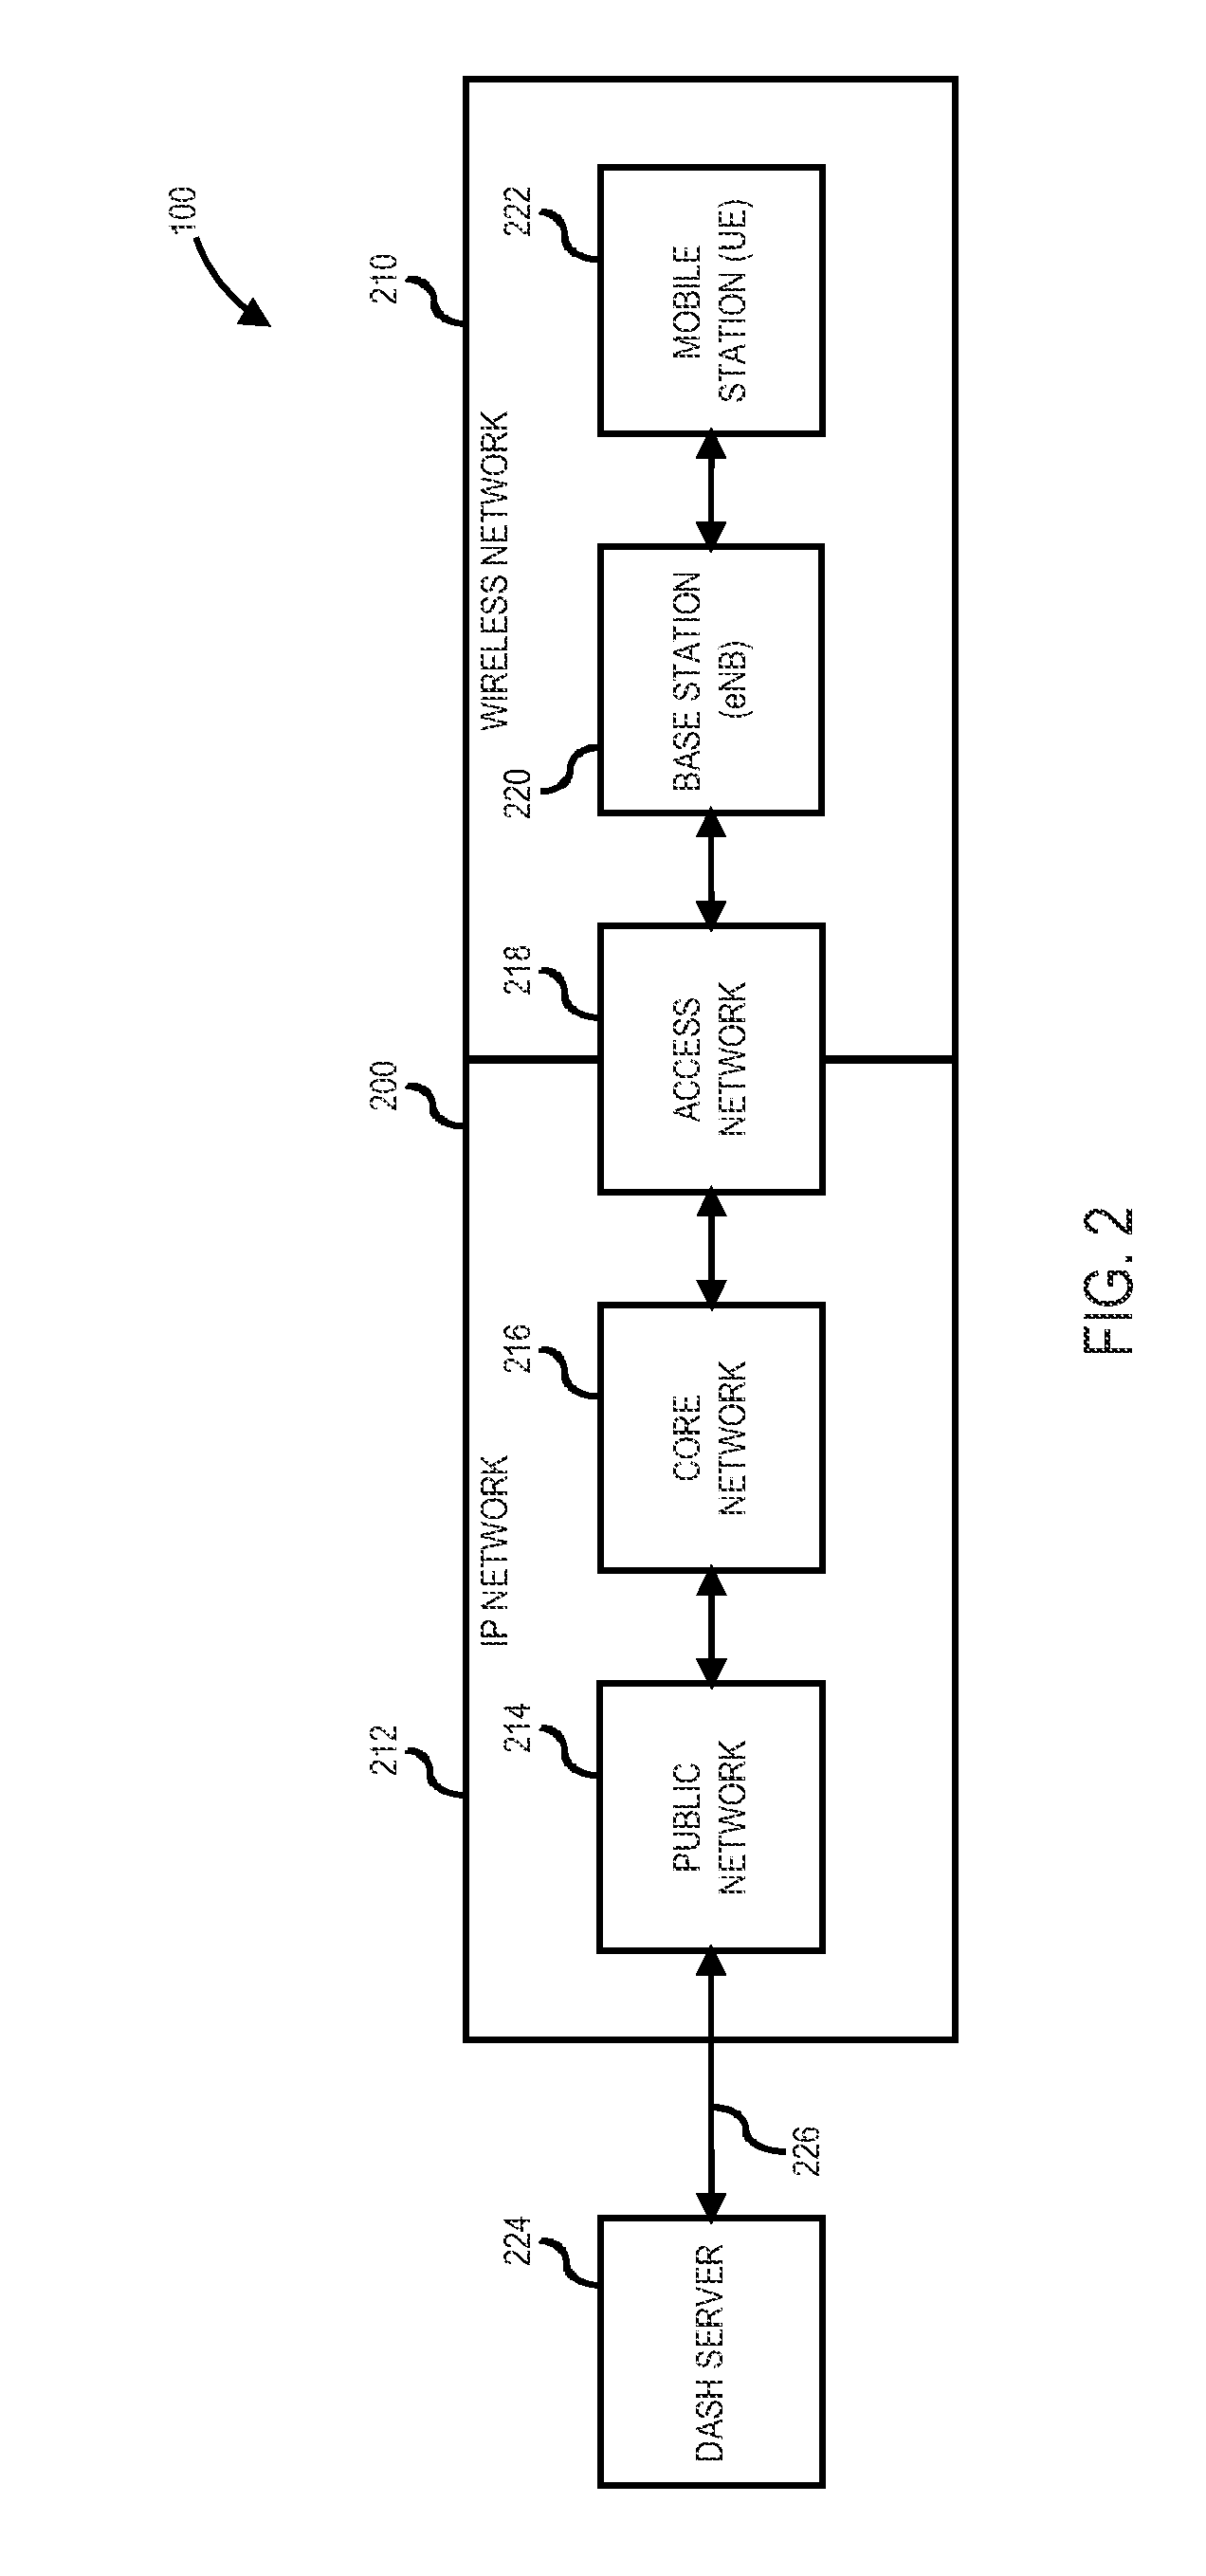 Methods for quality-aware adaptive streaming over hypertext transfer protocol